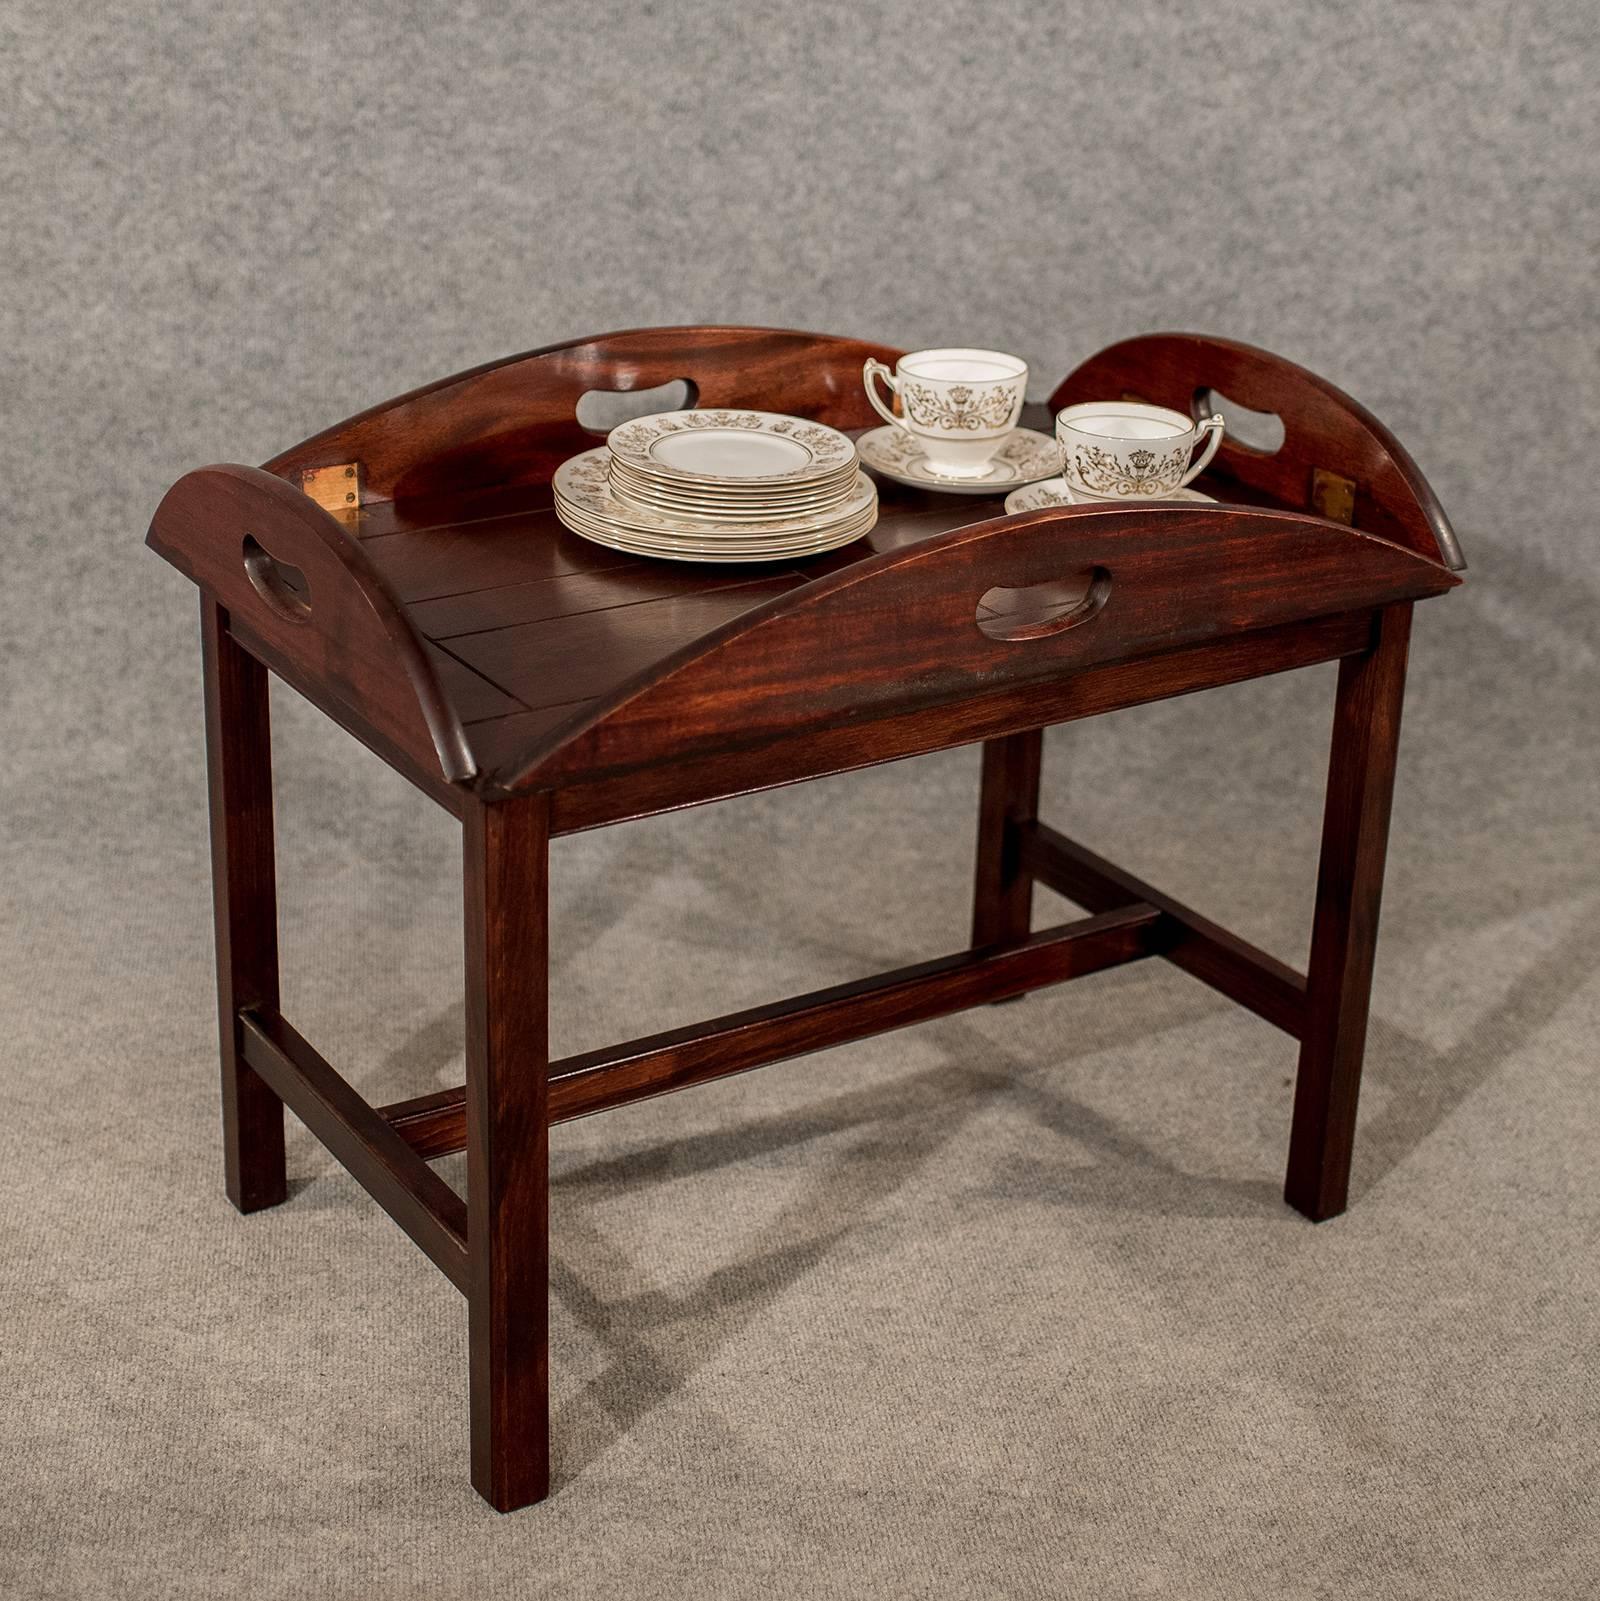 A superb butler's tray table presented in excellent antique condition
Displaying quality throughout with desirable lift off tray top
In stunning mahogany with a very desirable tone and fine quality graining
Rising from a robust leg set with